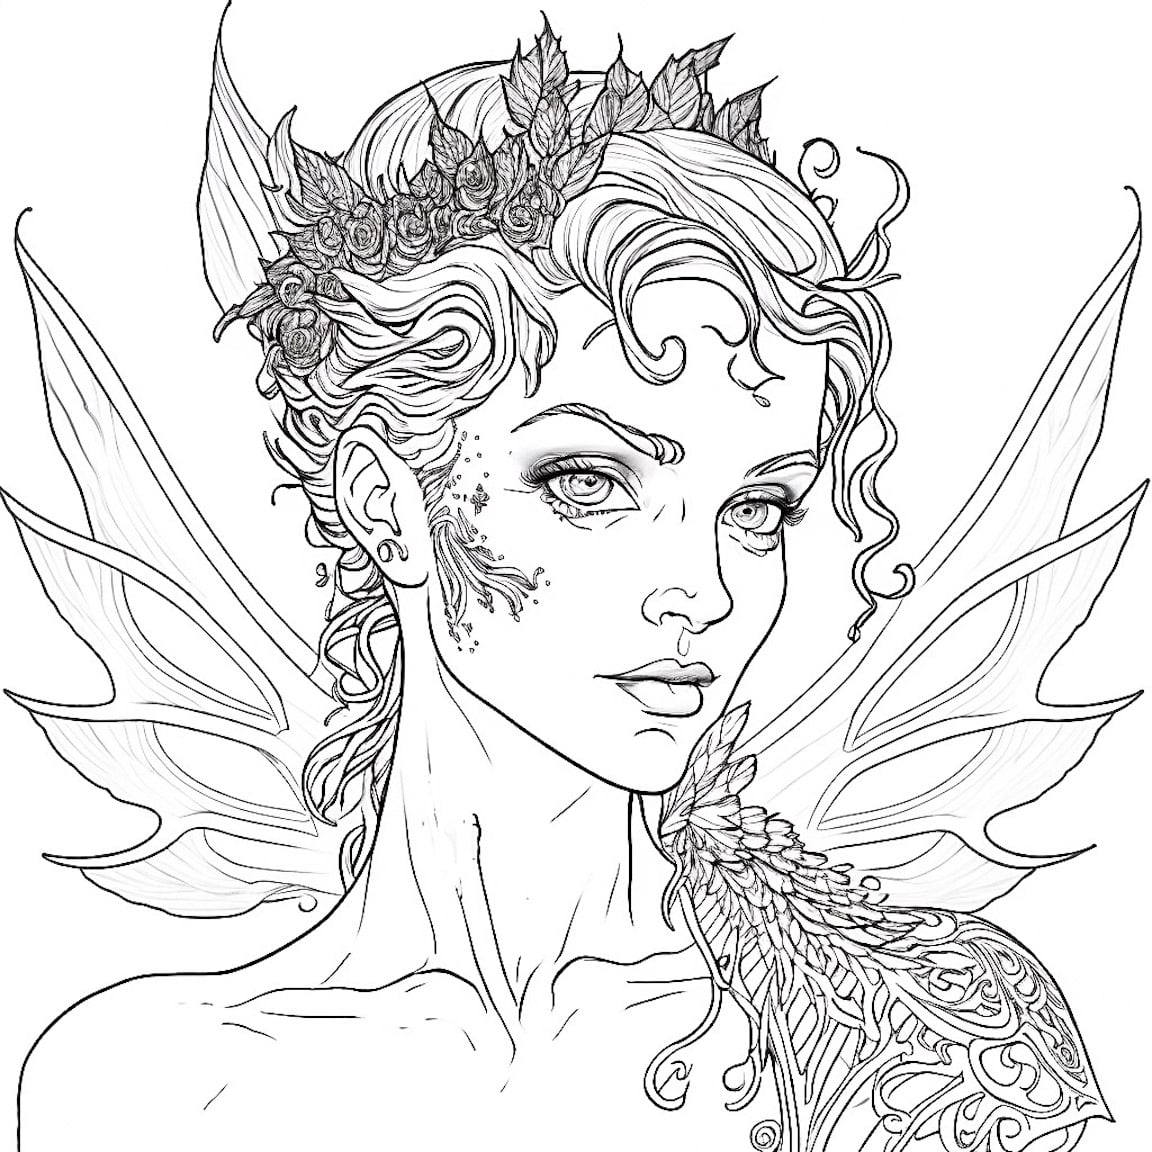 Fascinating Fairy Coloring Page For Adults Mindful Life - Coloring Home